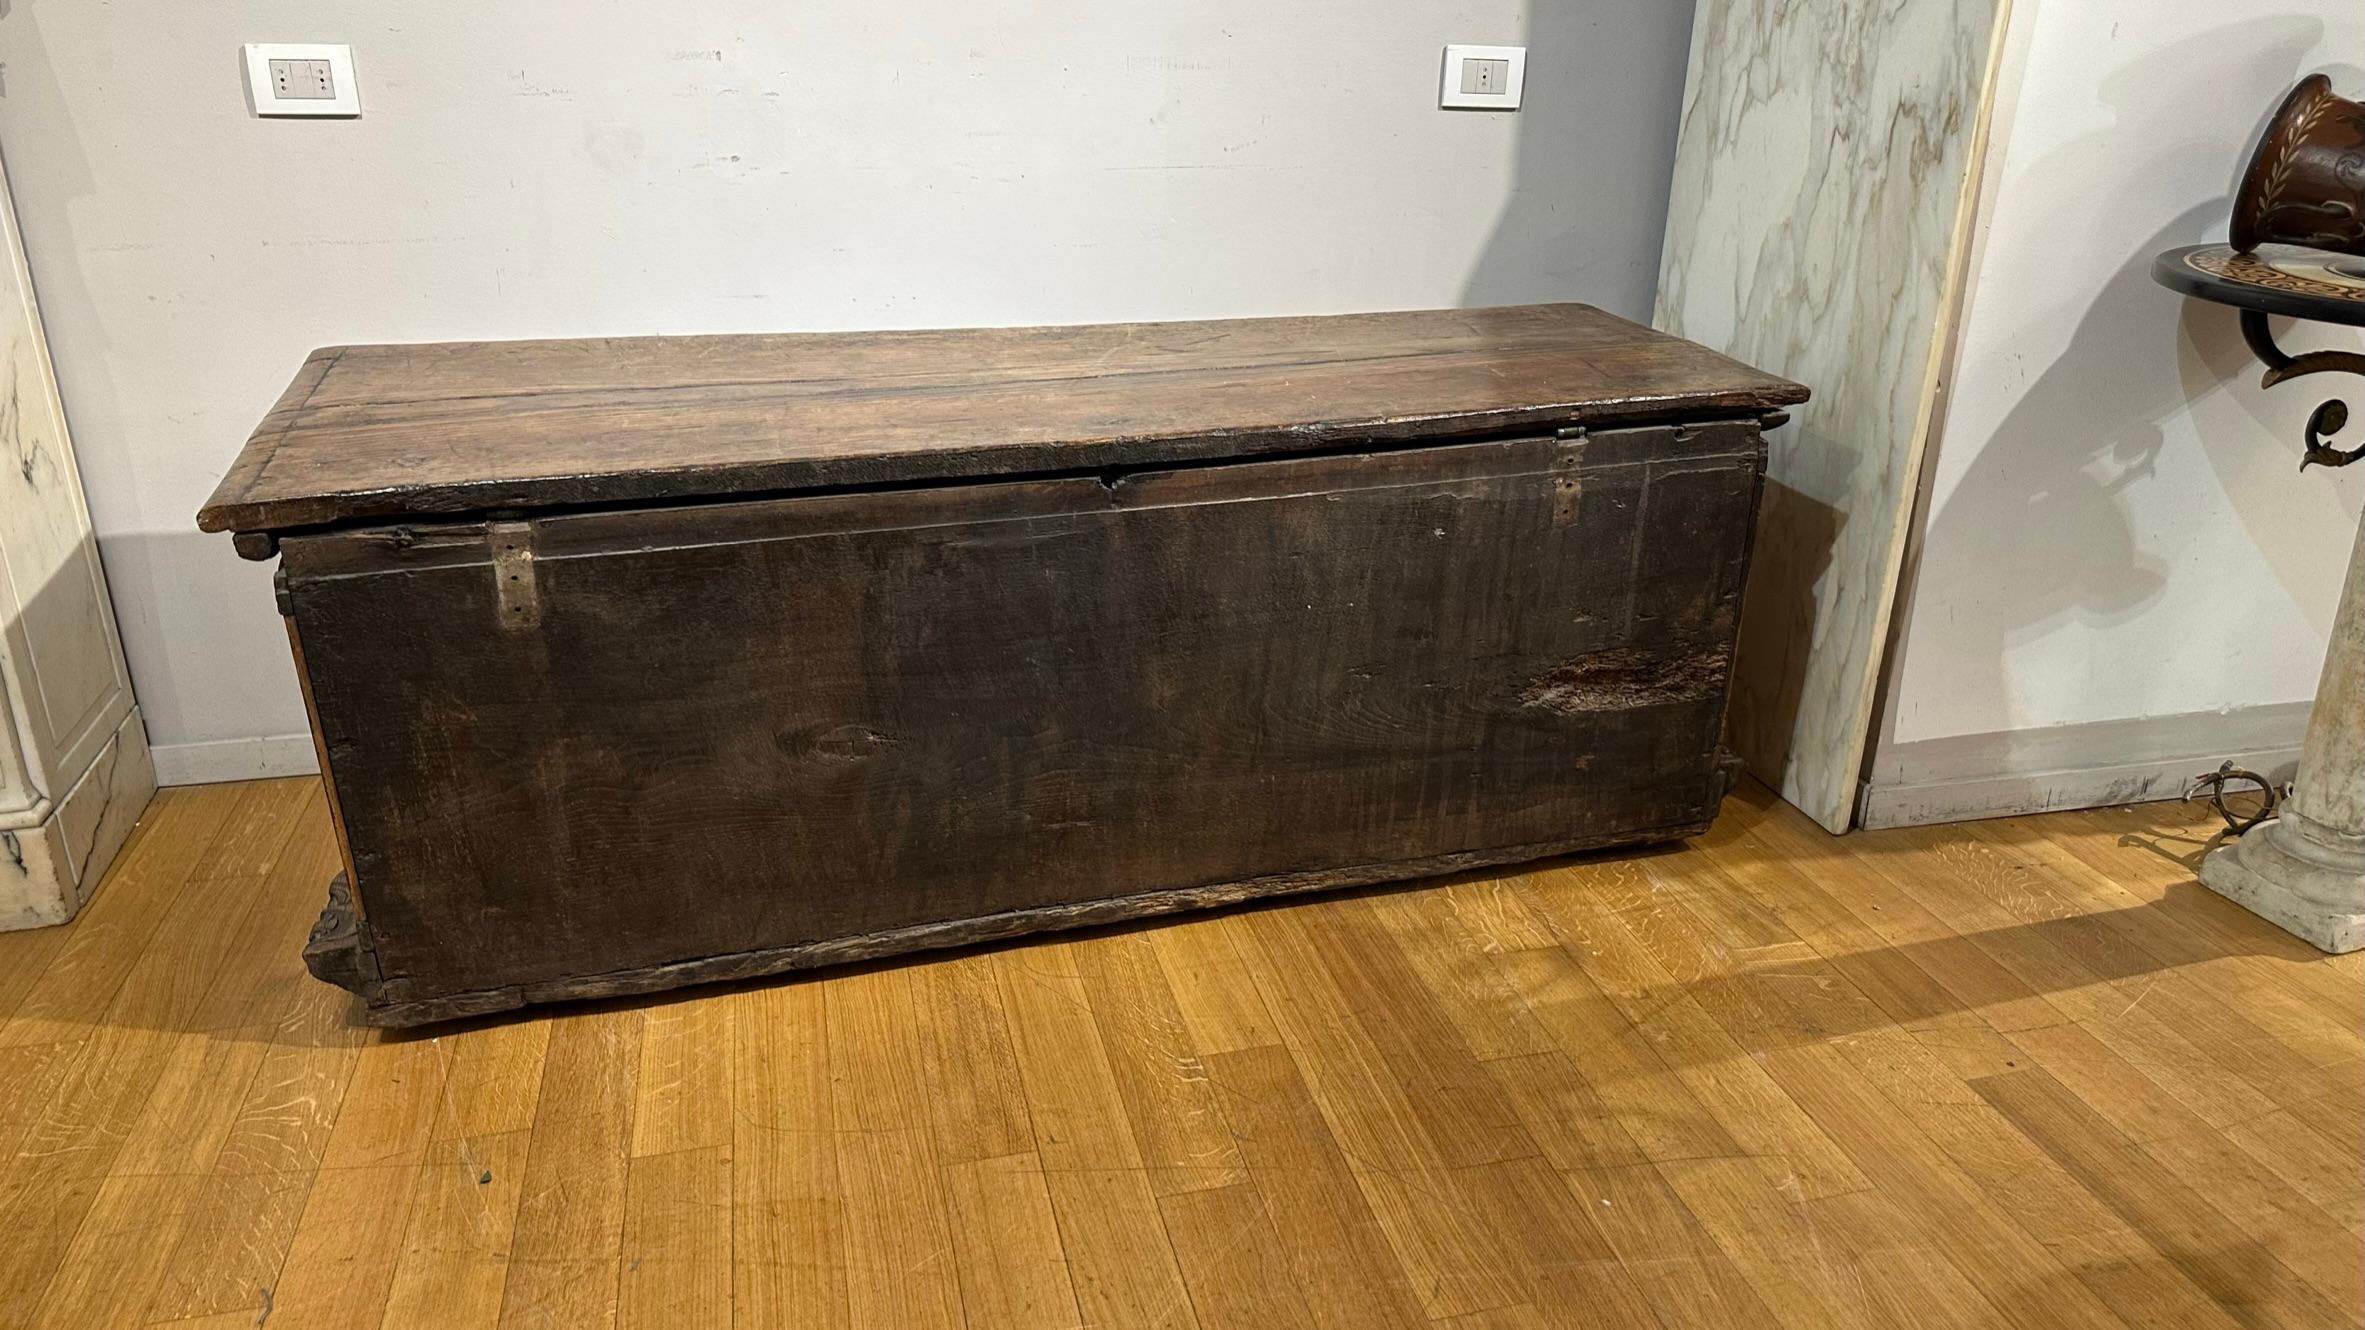 SECOND HALF OF THE 16th CENTURY CHESTNUT CHEST  For Sale 3